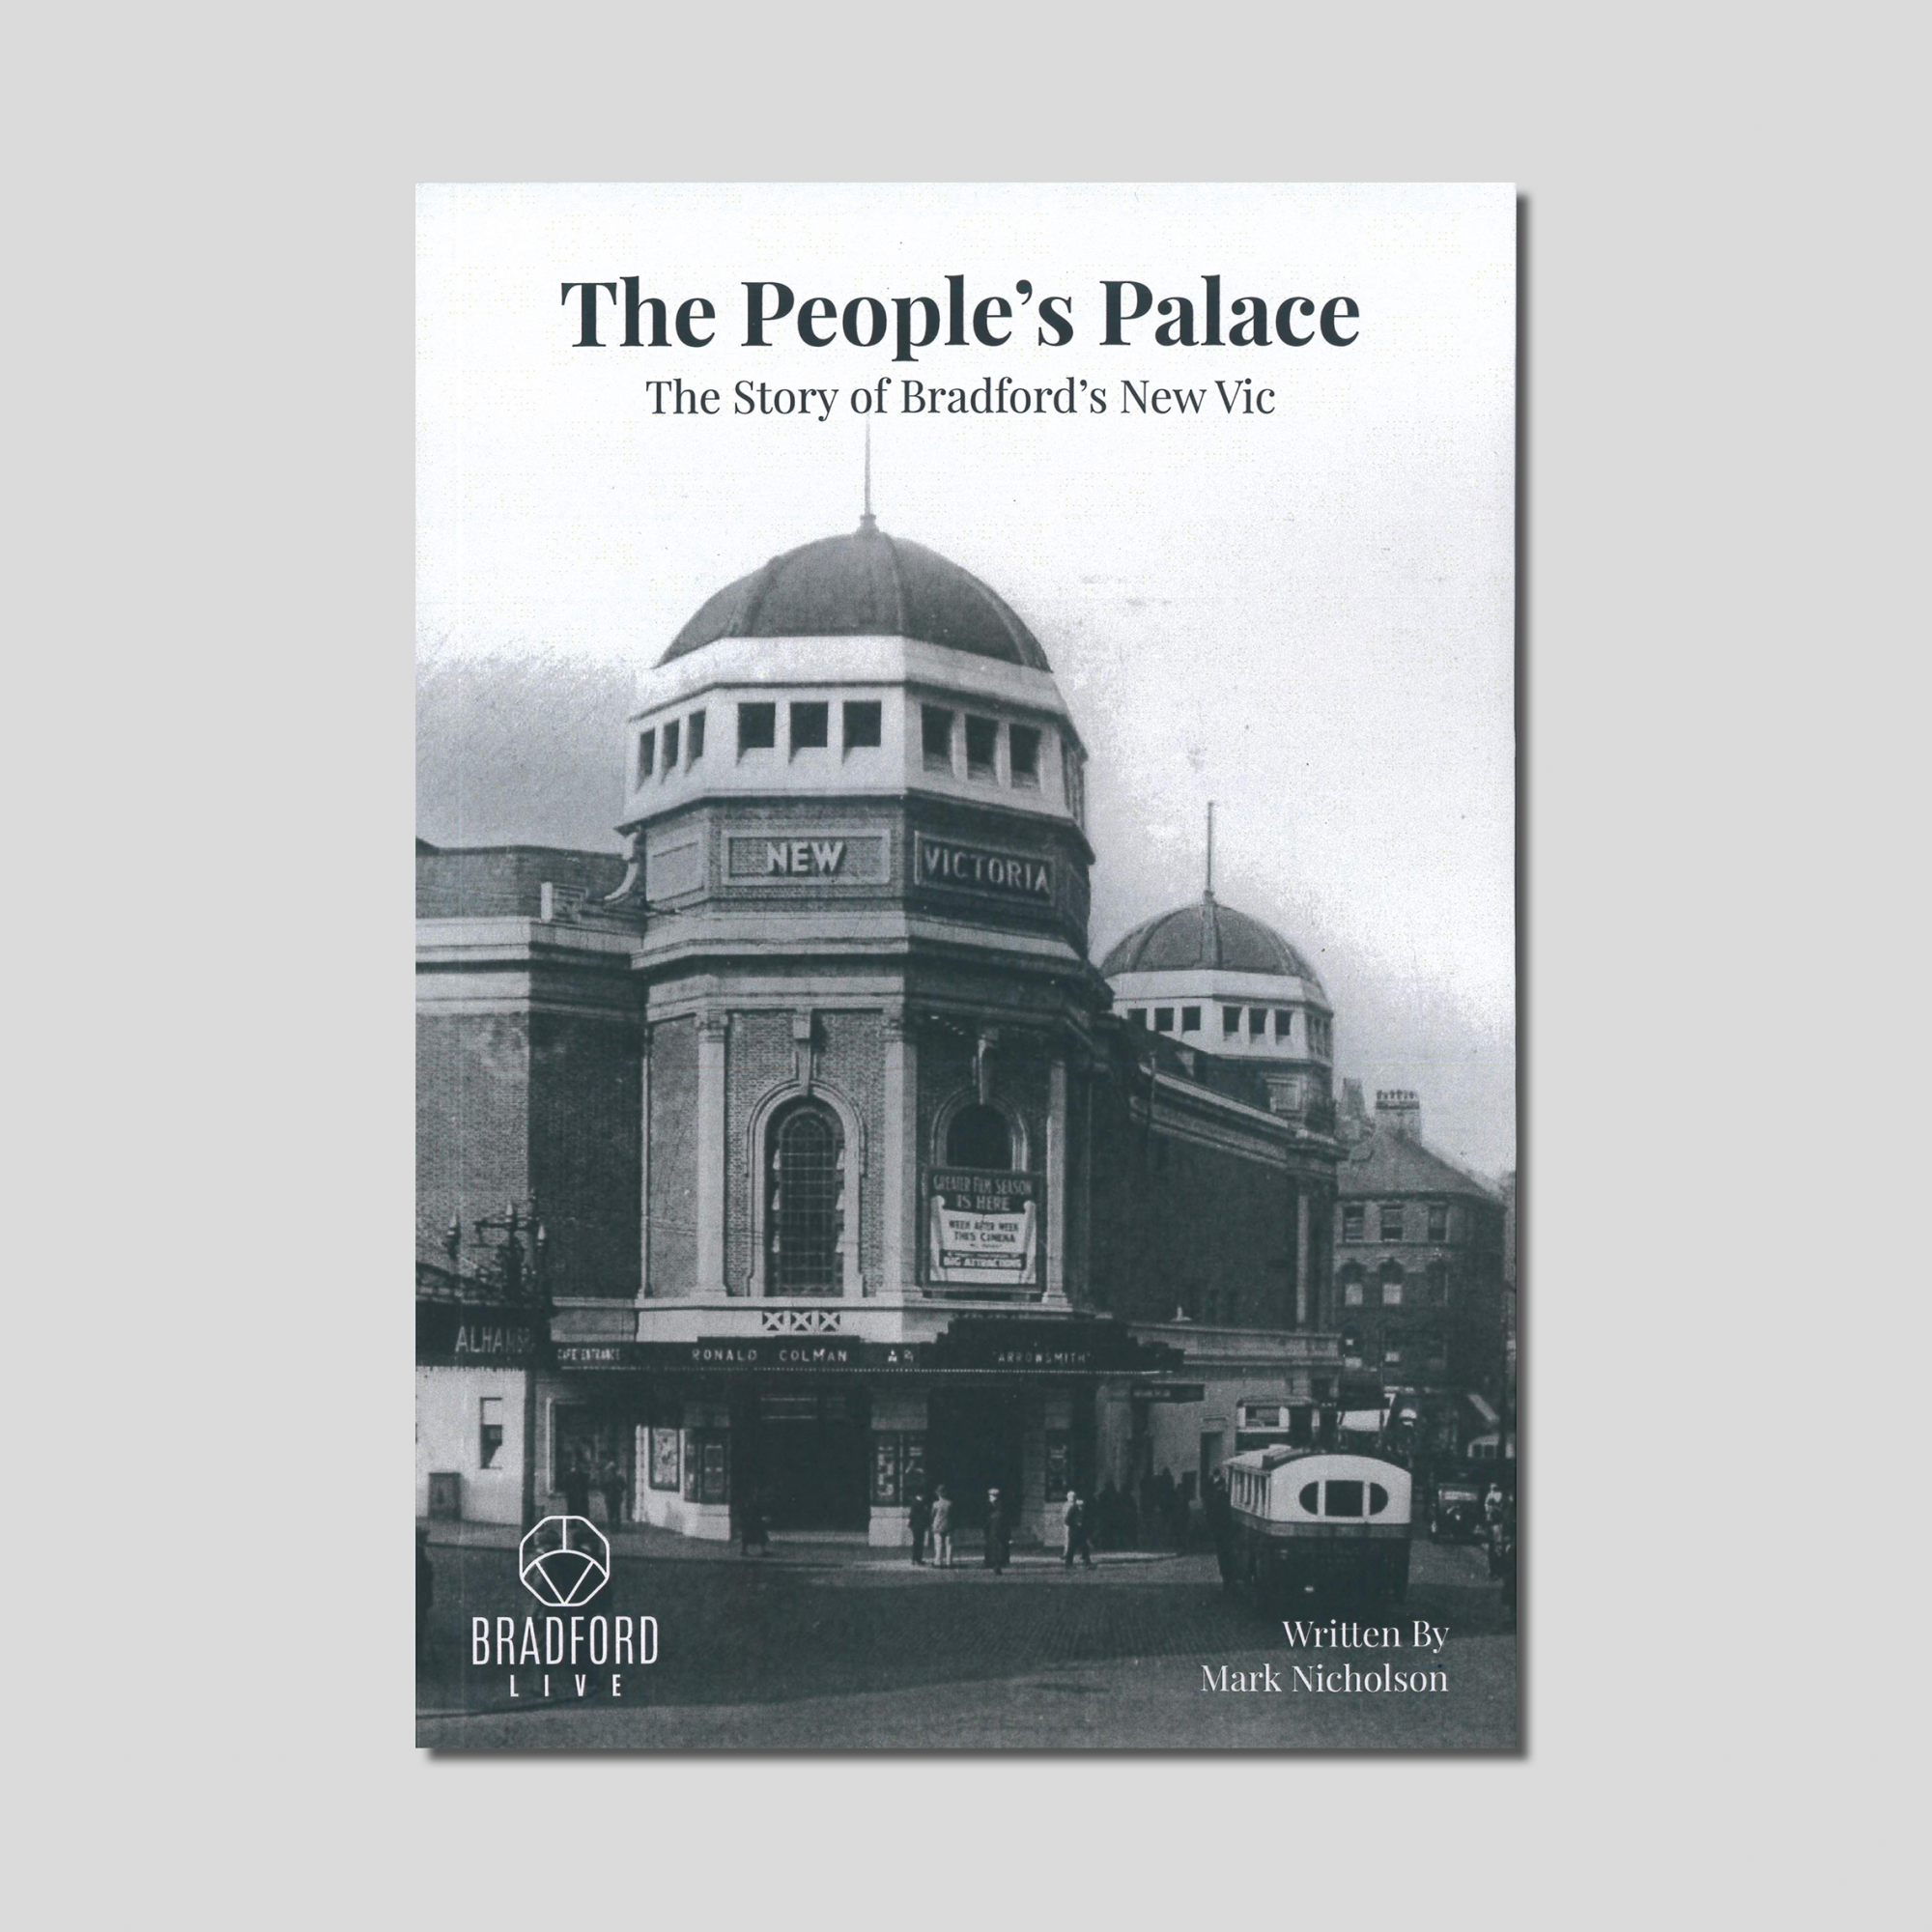 Book Launch and Signing – The People’s Palace by Mark Nicholson — Impressions Gallery